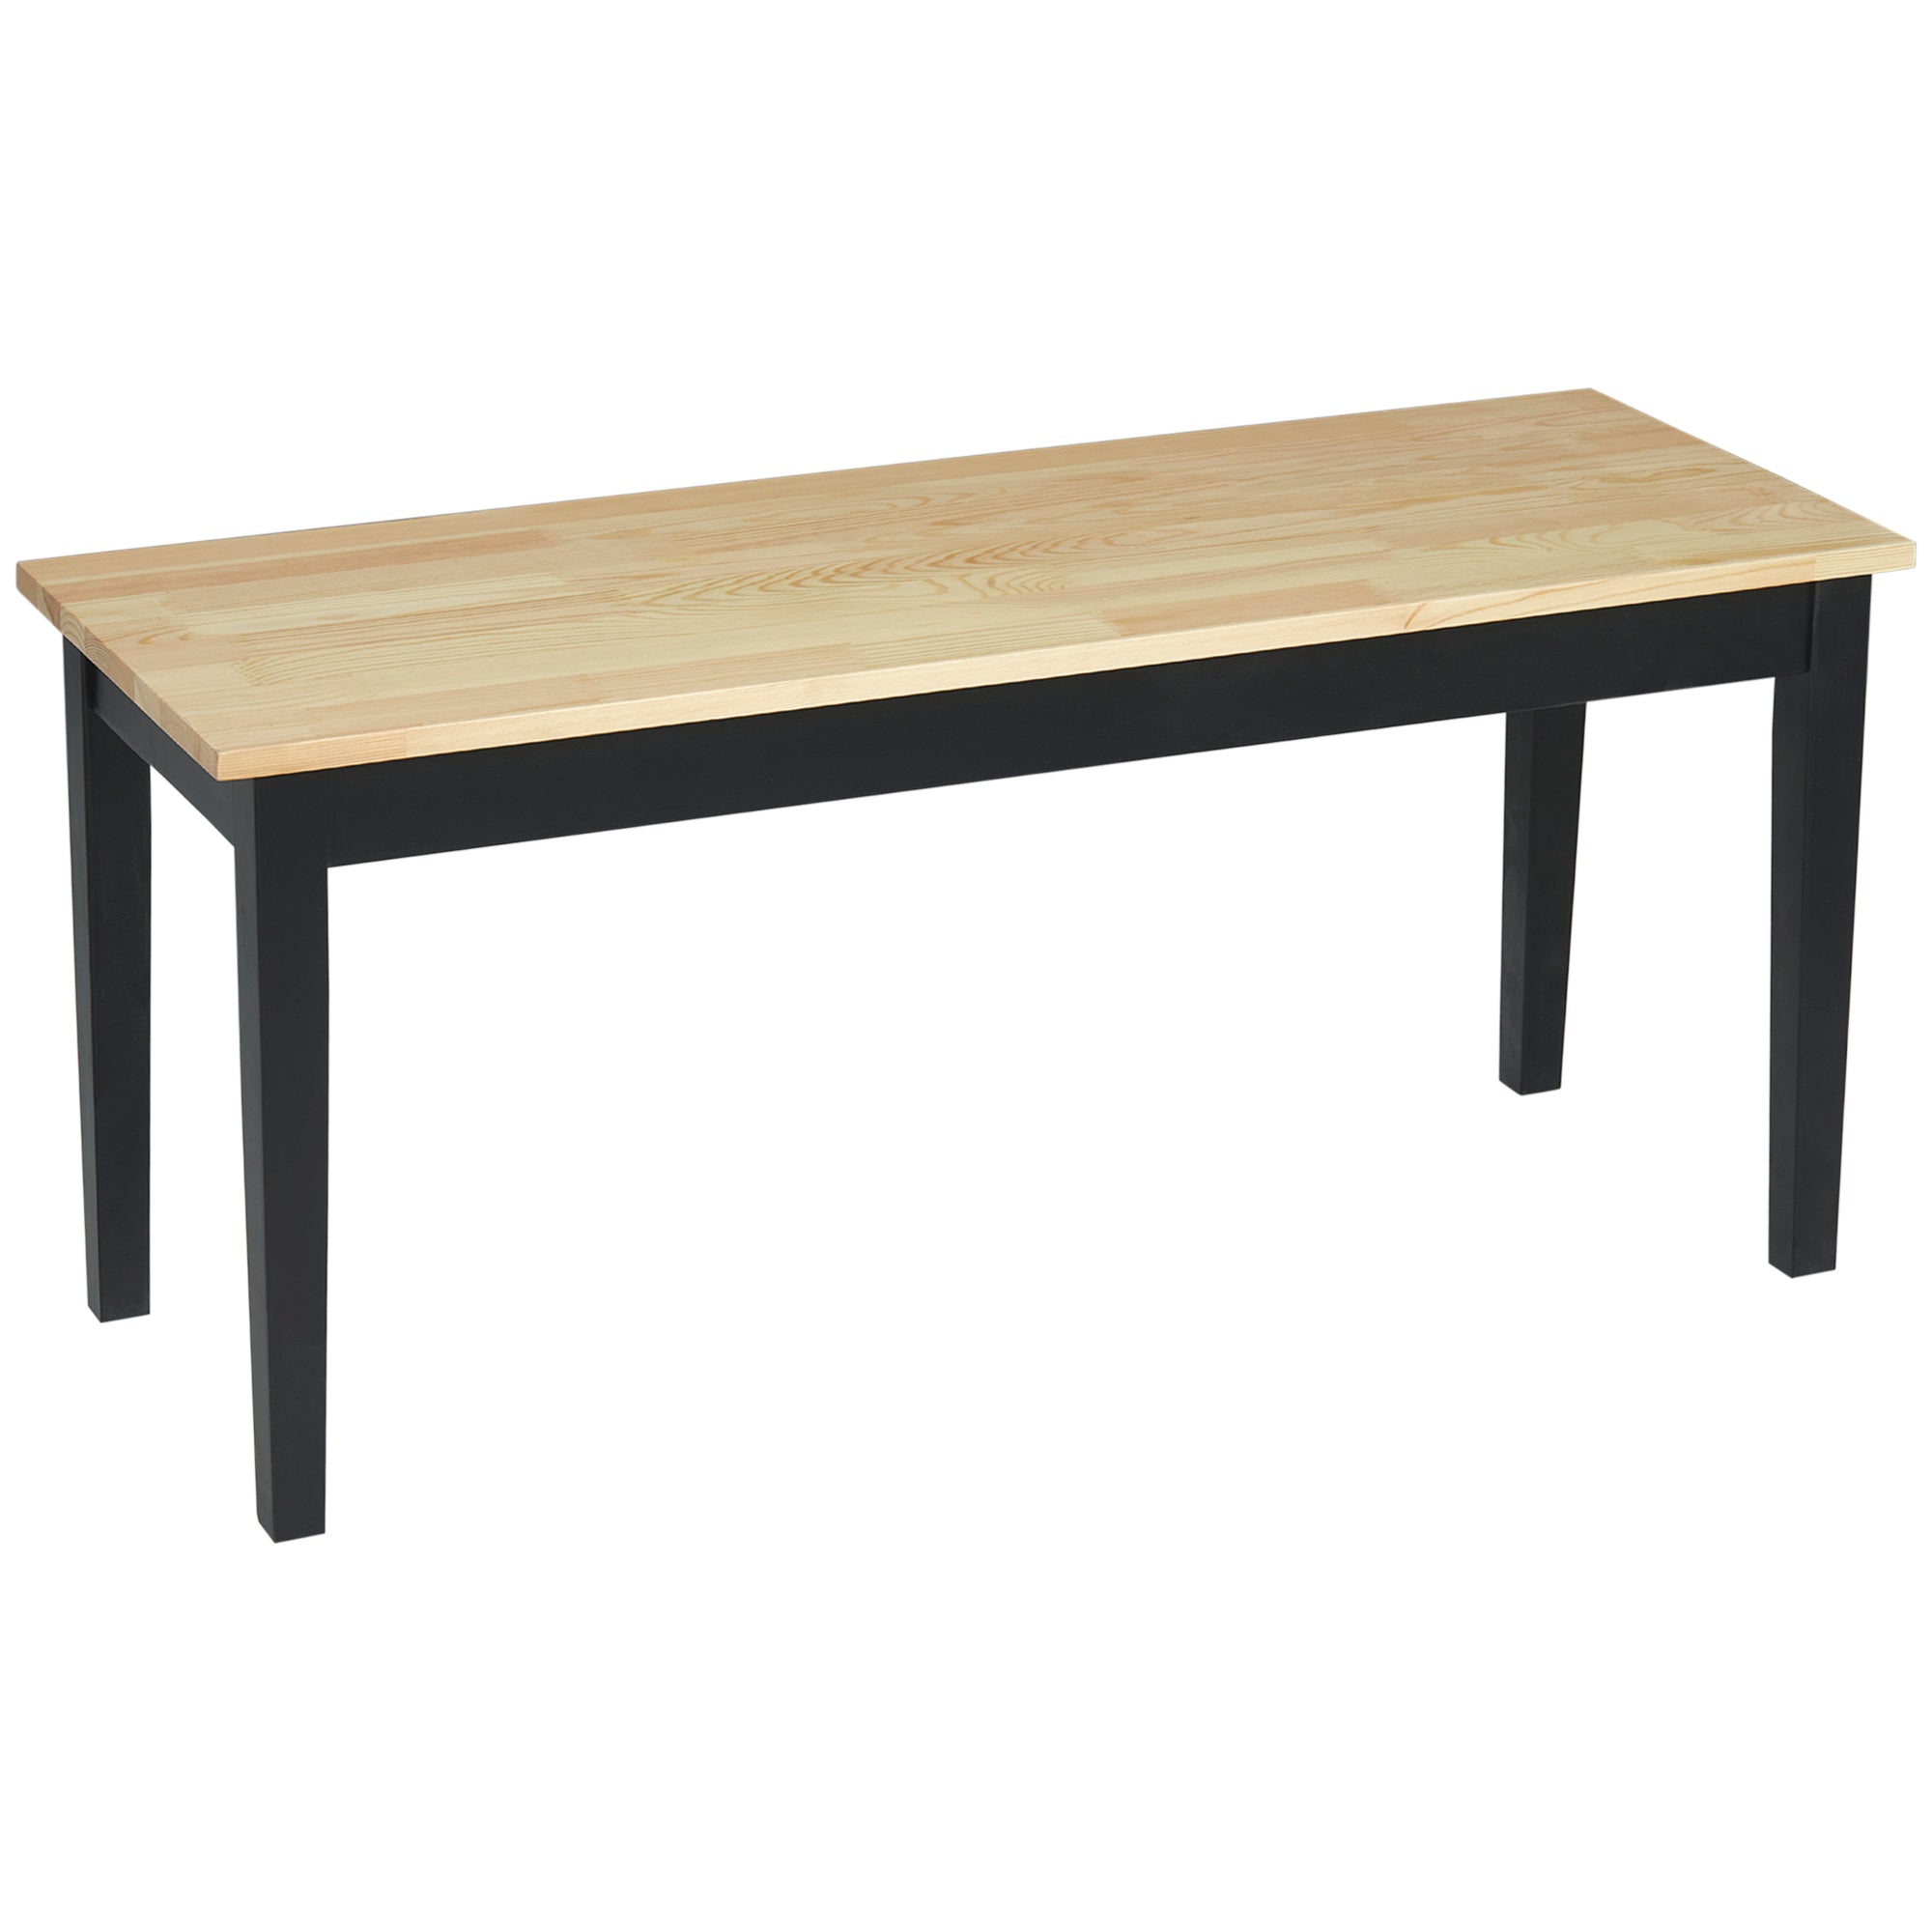 HOMCOM Wood Dining Bench Wooden Bench for 2 People - Natural Wood Effect  | TJ Hughes Natural